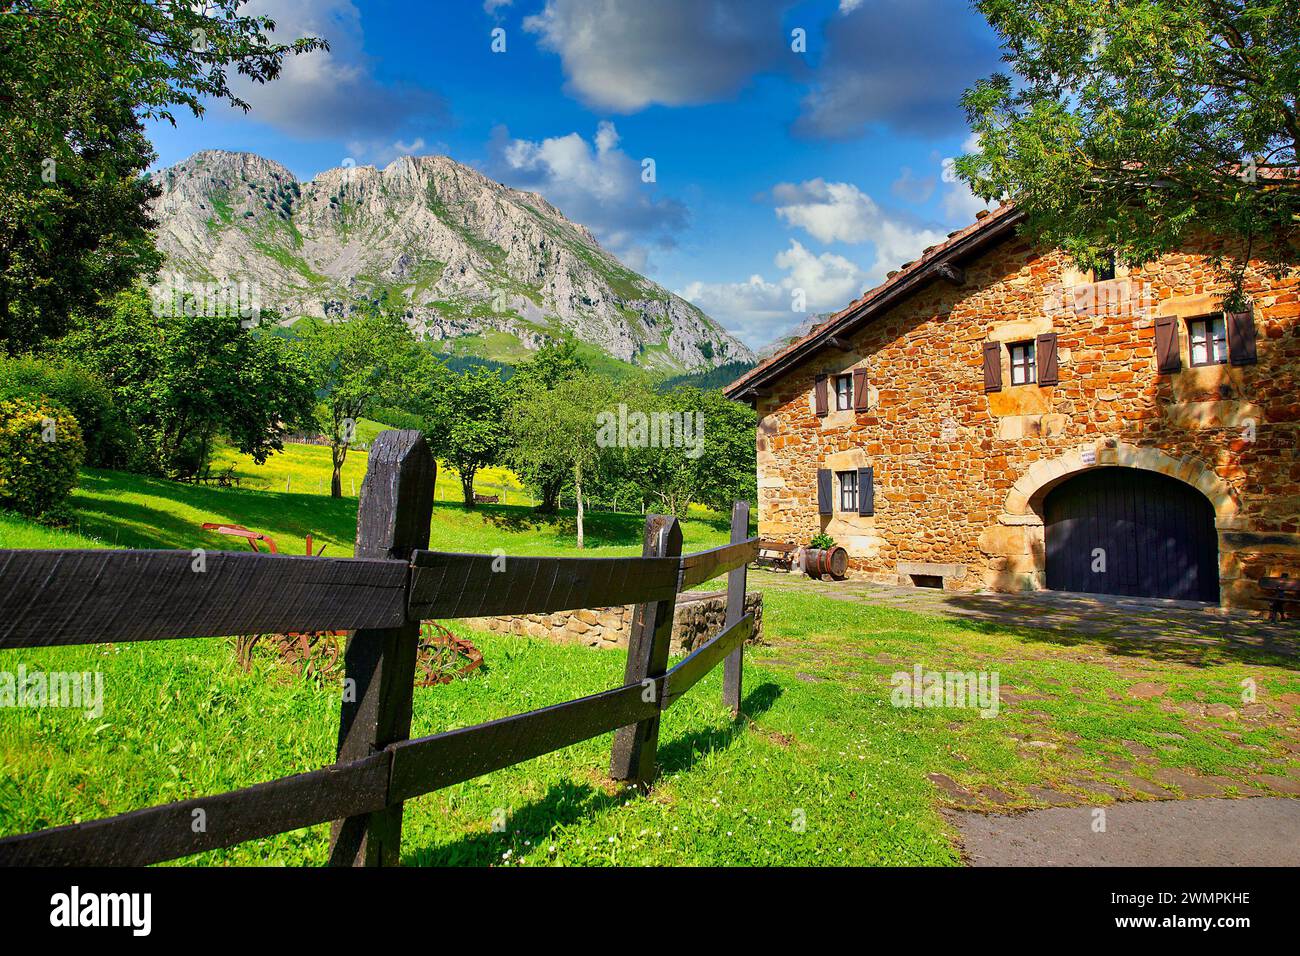 Mount Amboto and rural house, Axpe, Valley of Atxondo, Biscay, Basque Country, Spain Stock Photo